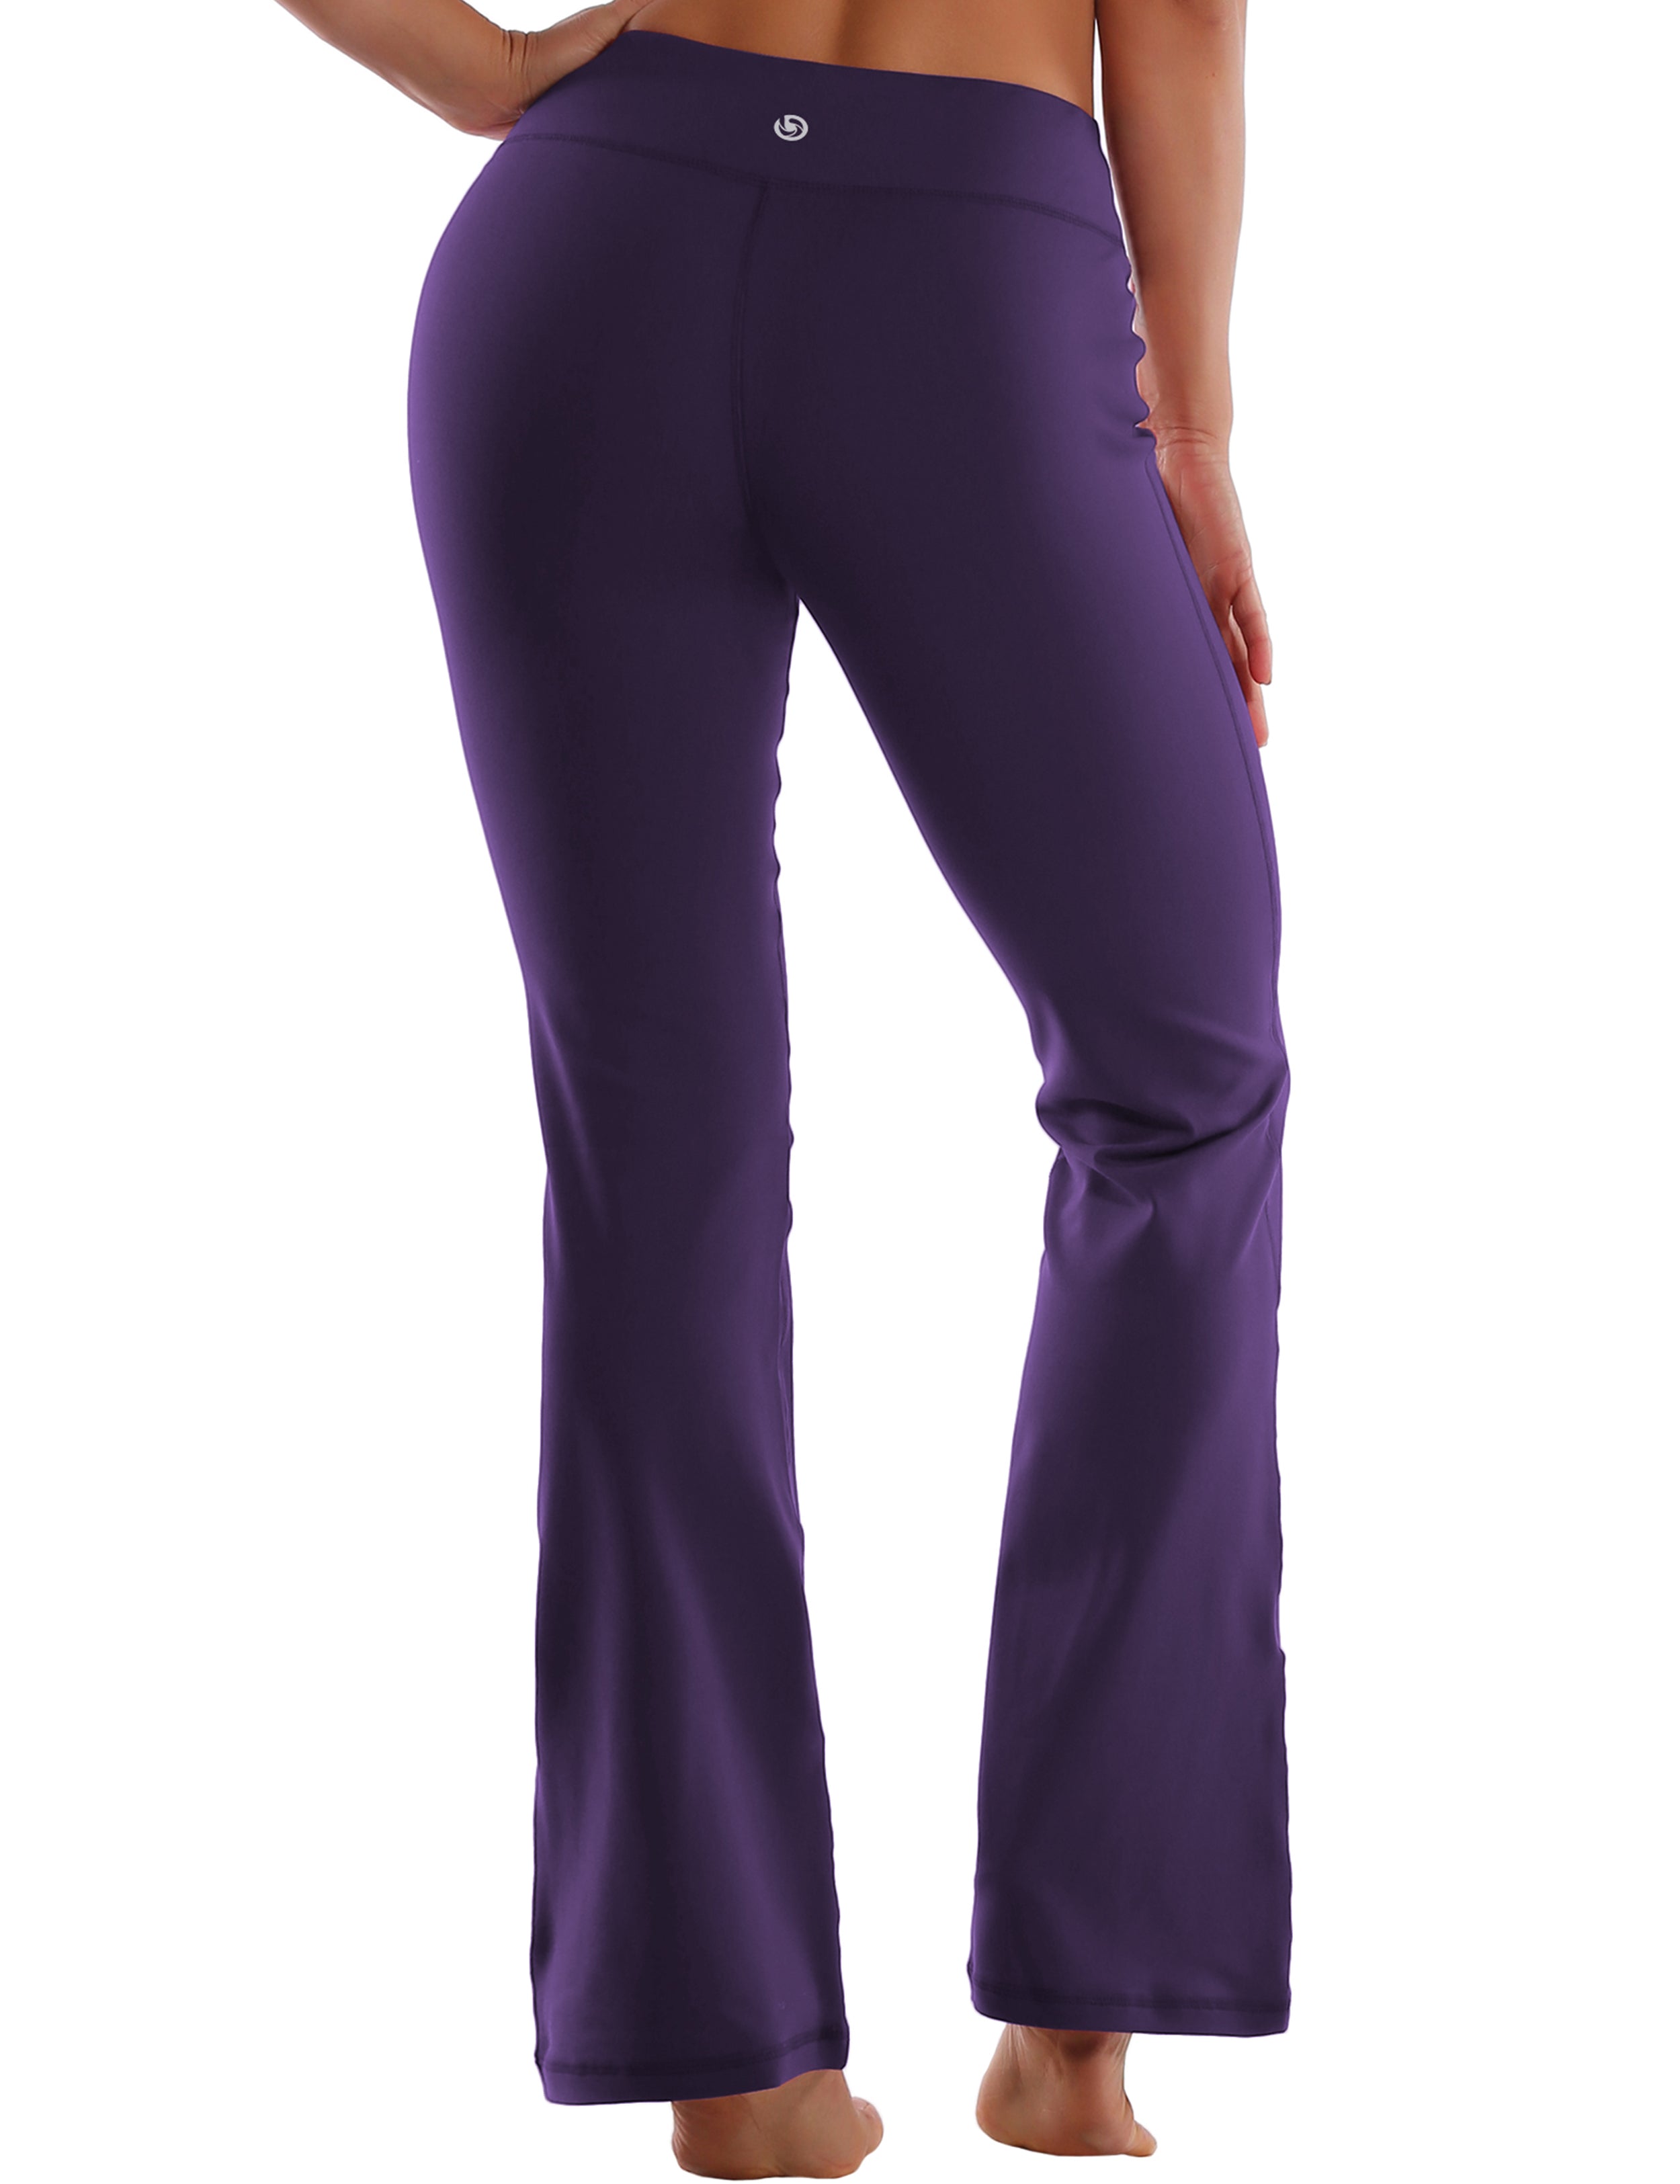 Cotton Nylon Bootcut Leggings darkpurple 87%Nylon/13%Spandex (Super soft, cotton feel , 280gsm) Fabric doesn't attract lint easily 4-way stretch No see-through Moisture-wicking Inner pocket Four lengths